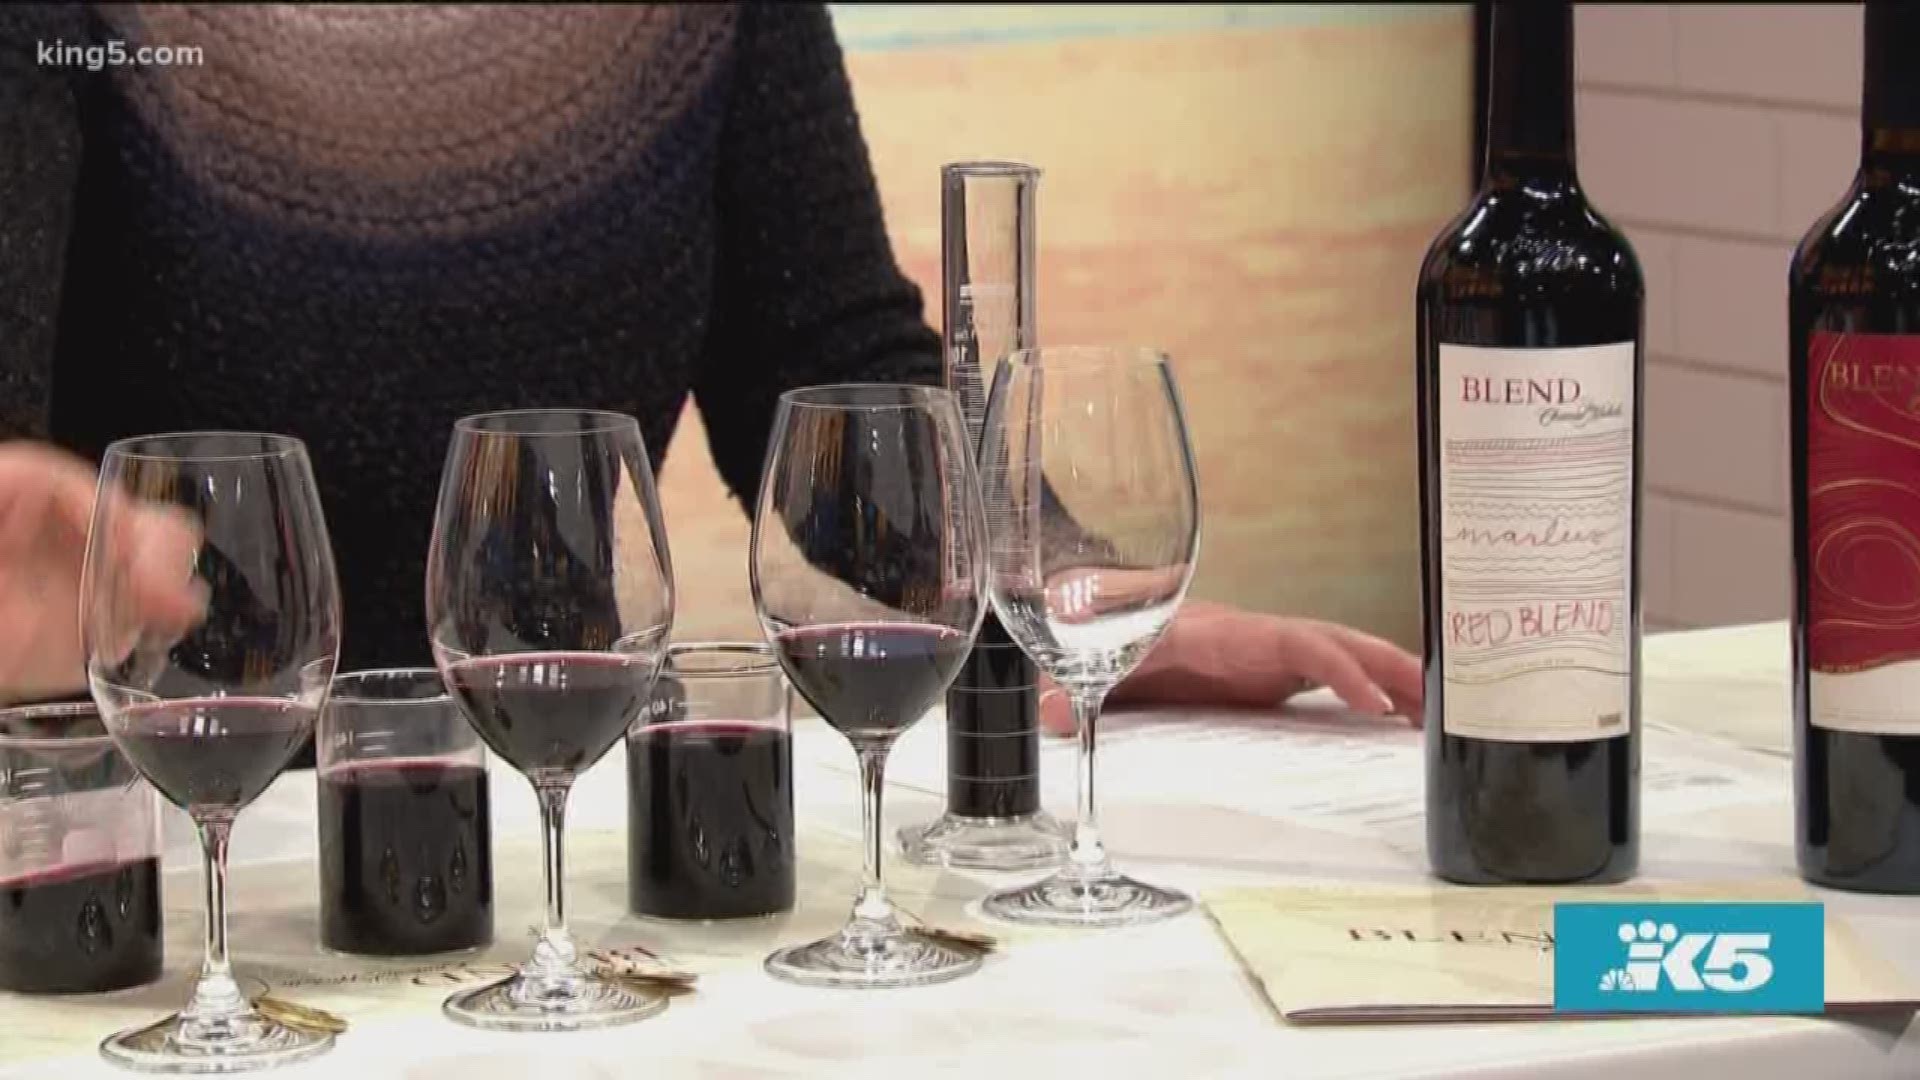 Blend wine with Chateau Ste. Michelle on select Holland America cruises.